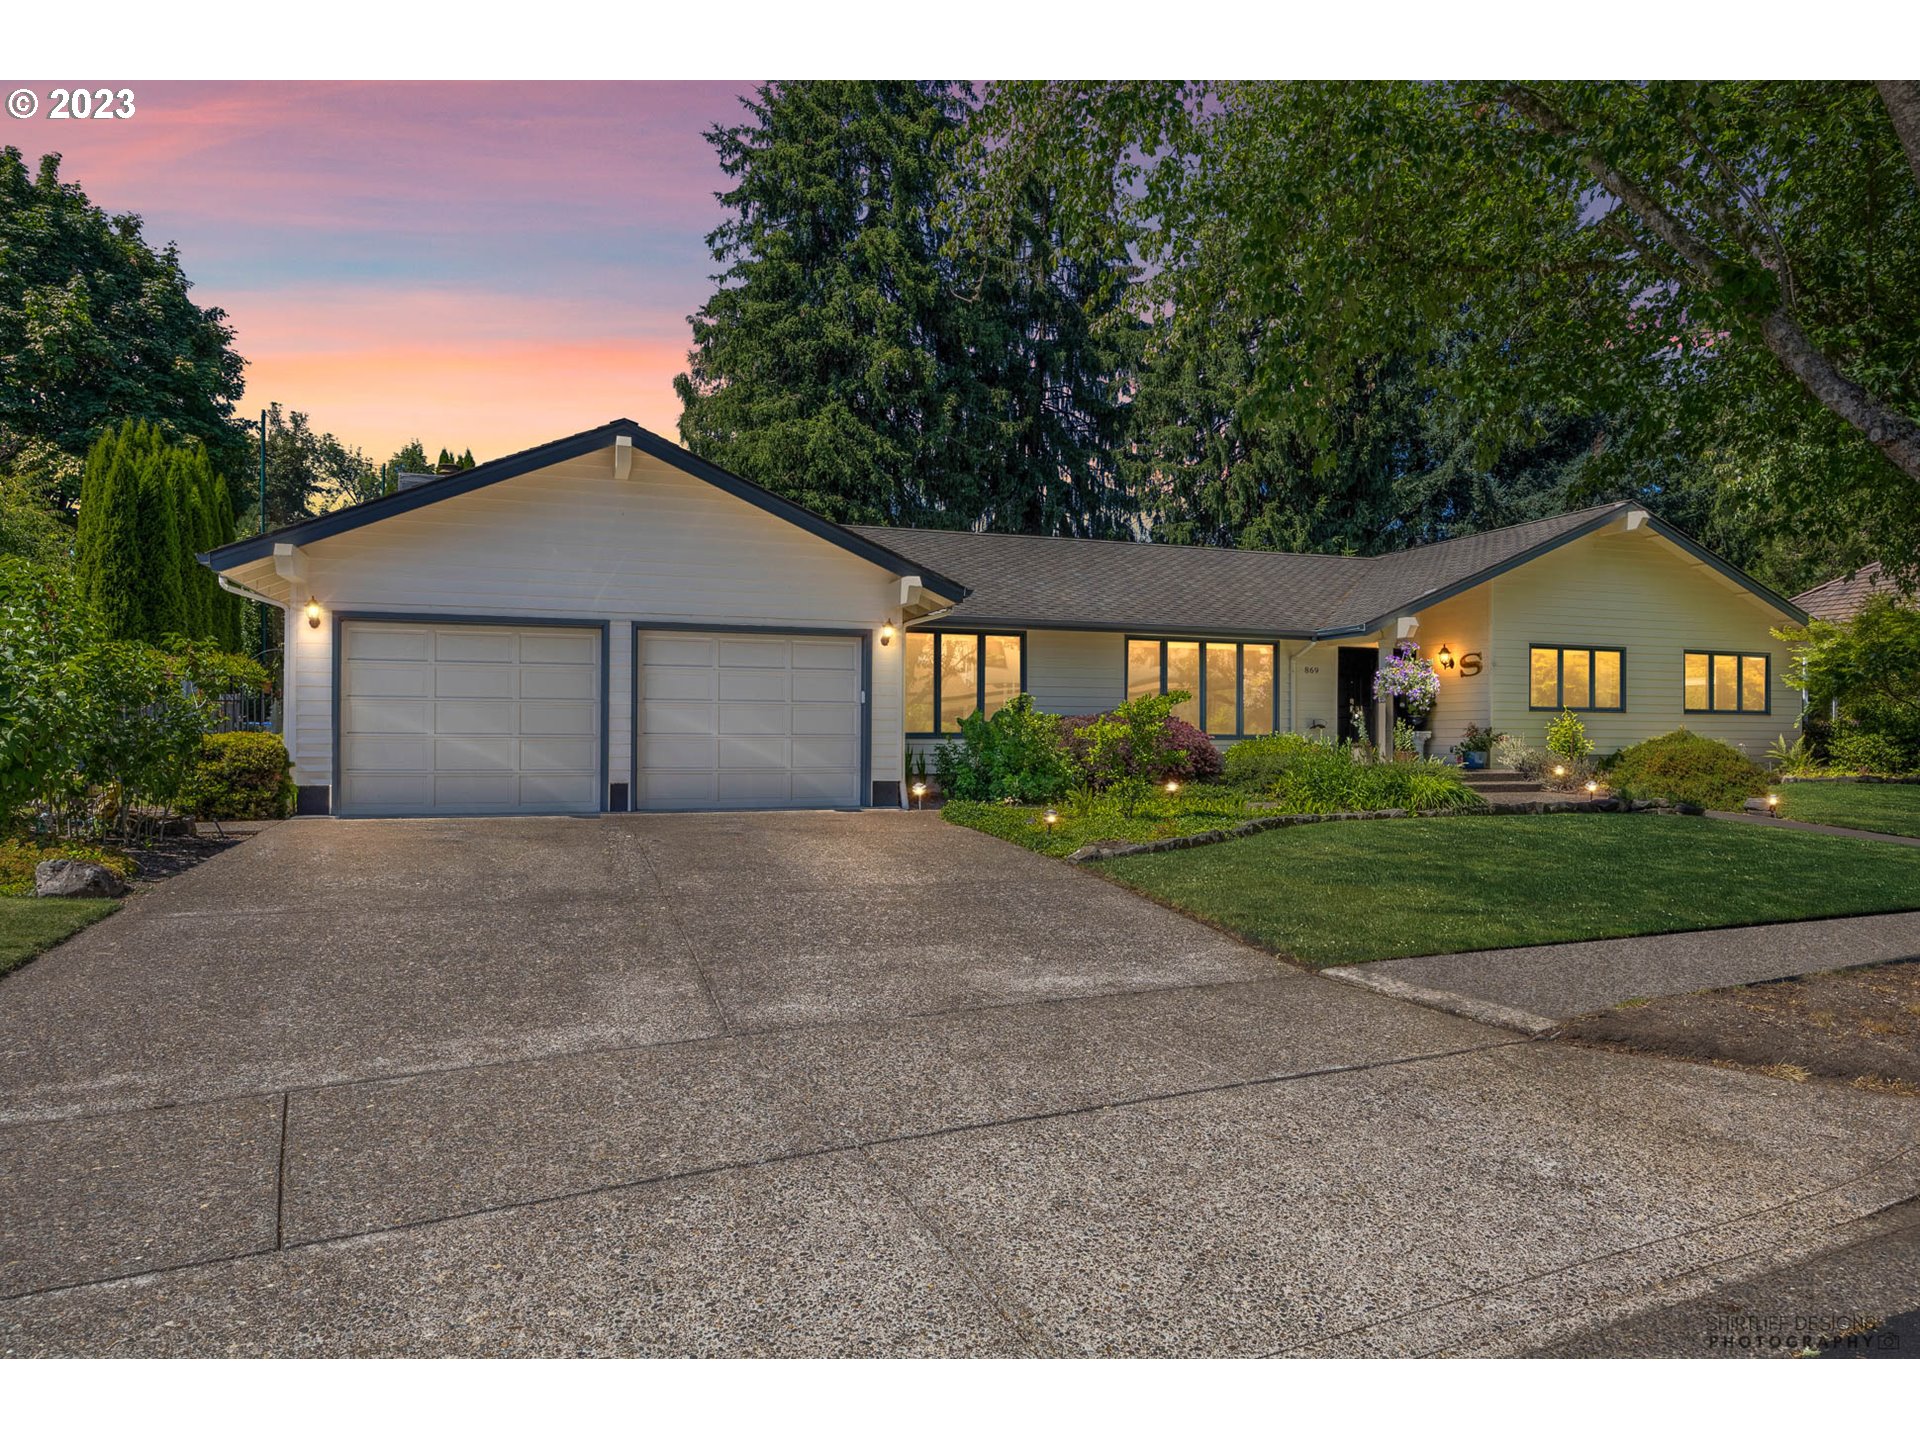 869 FAIRWAY VIEW DR, Eugene, OR 